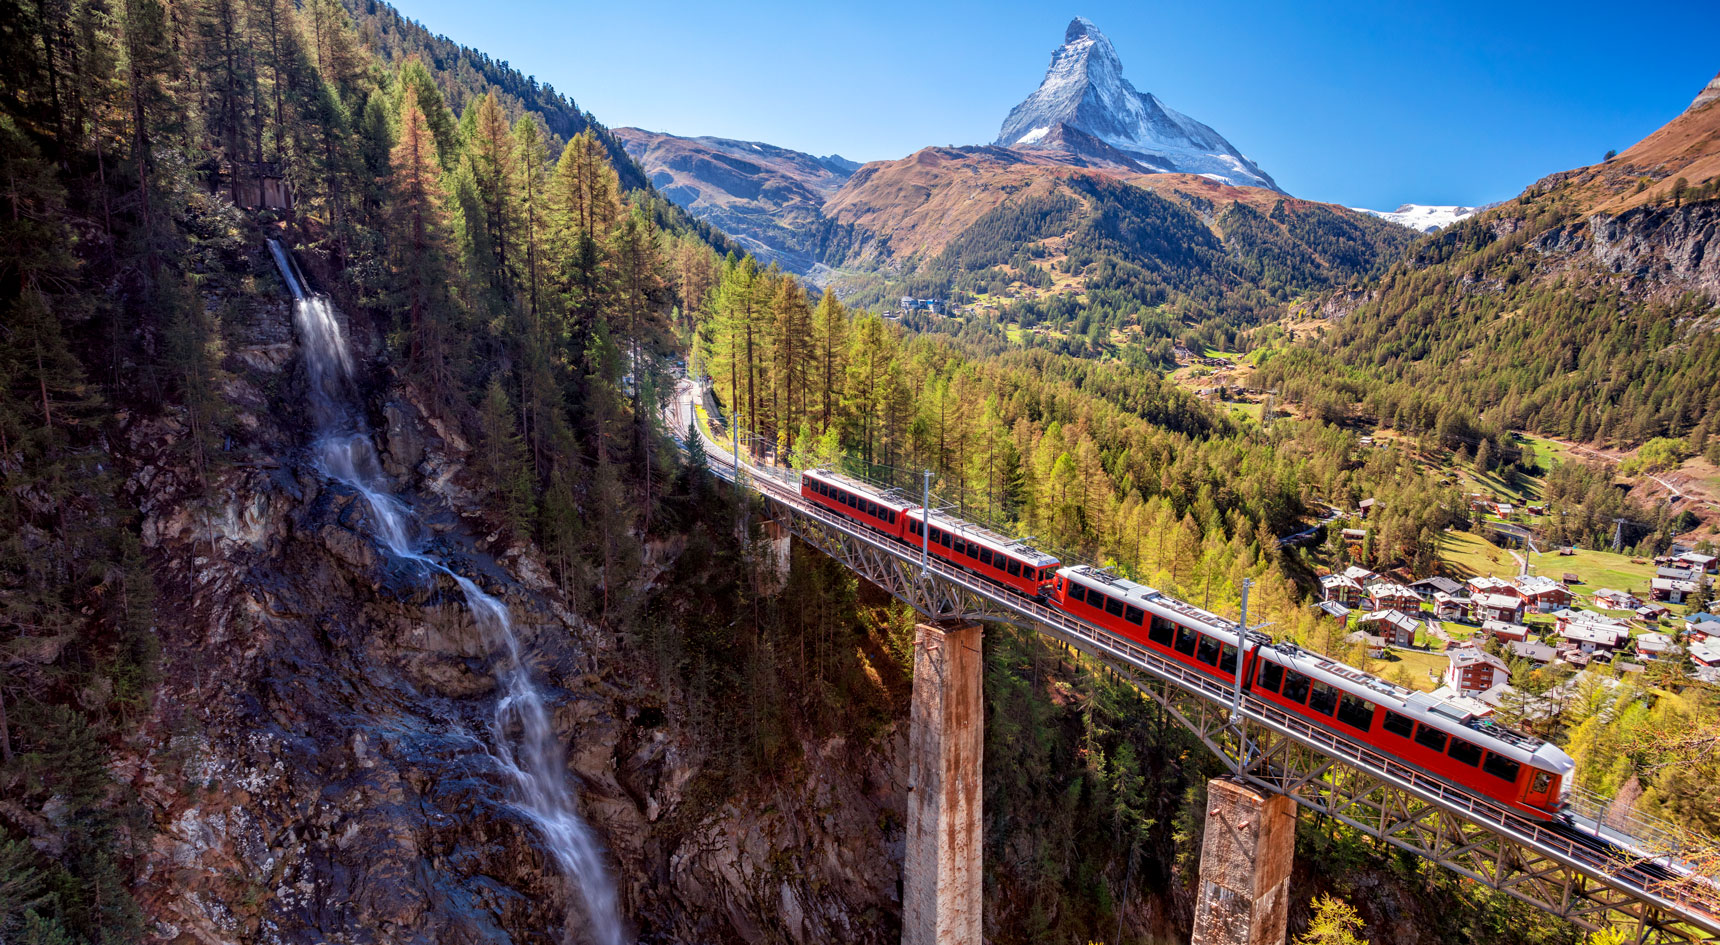 Bright red train on a viaduct next to a waterfall